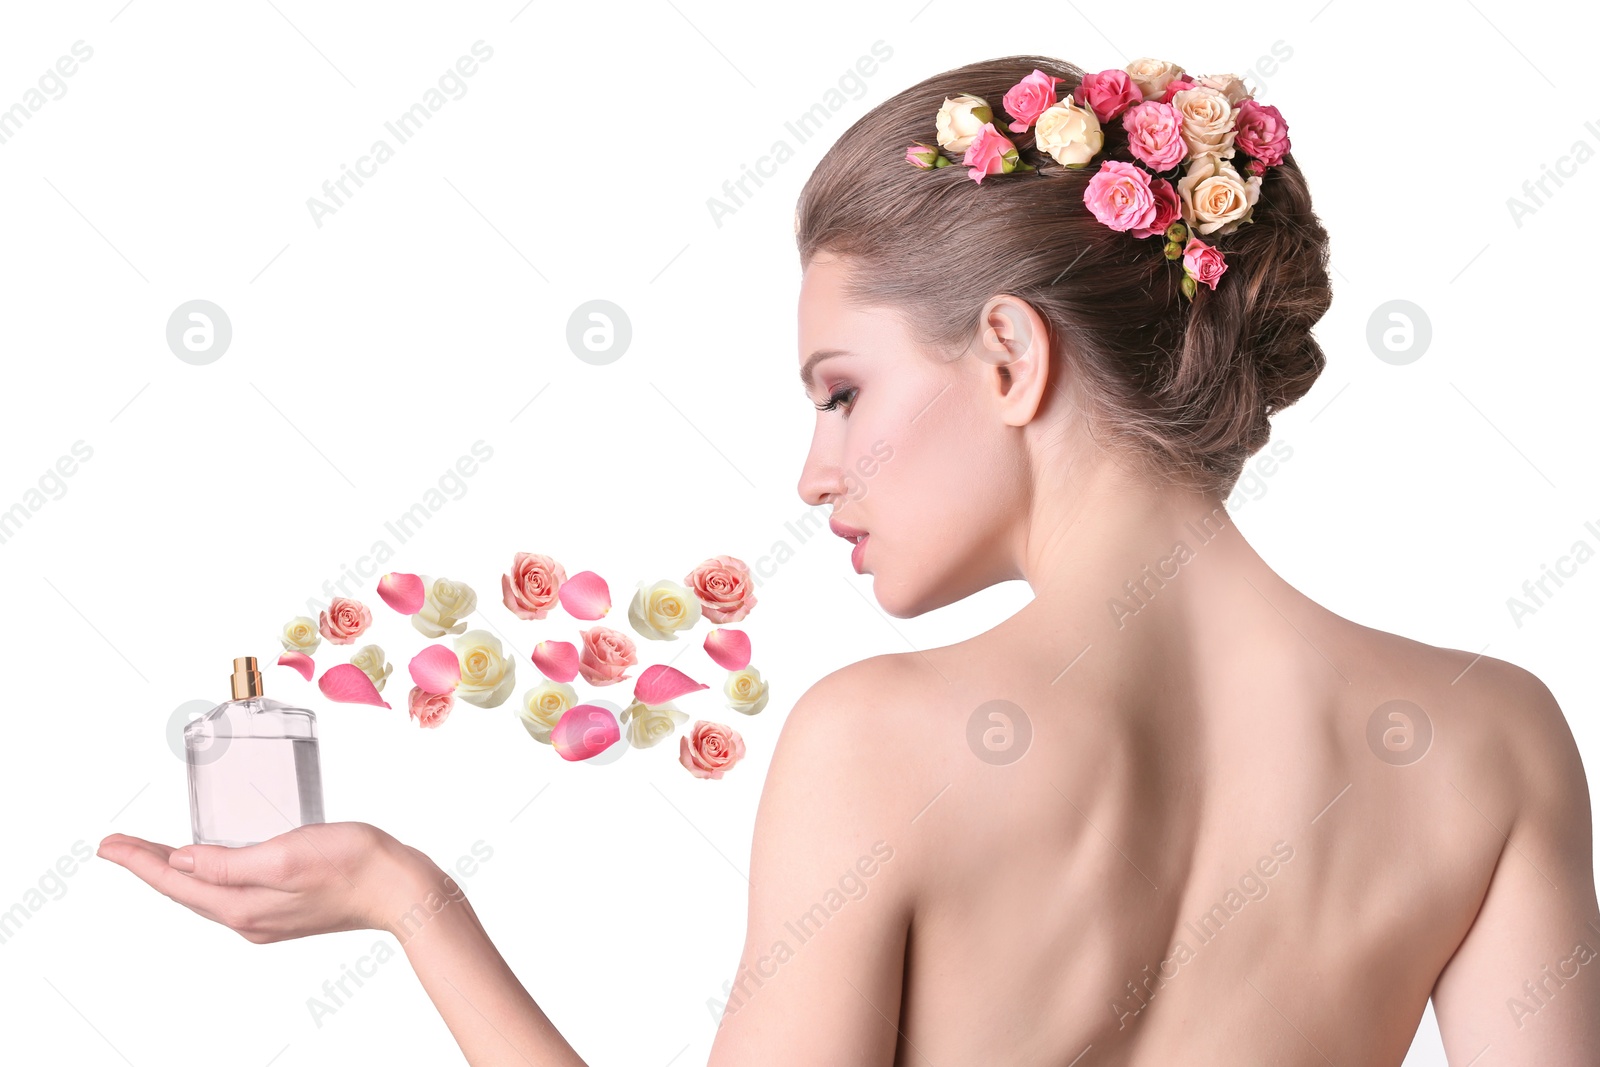 Image of Beautiful woman and bottle of perfume with floral scent on white background 